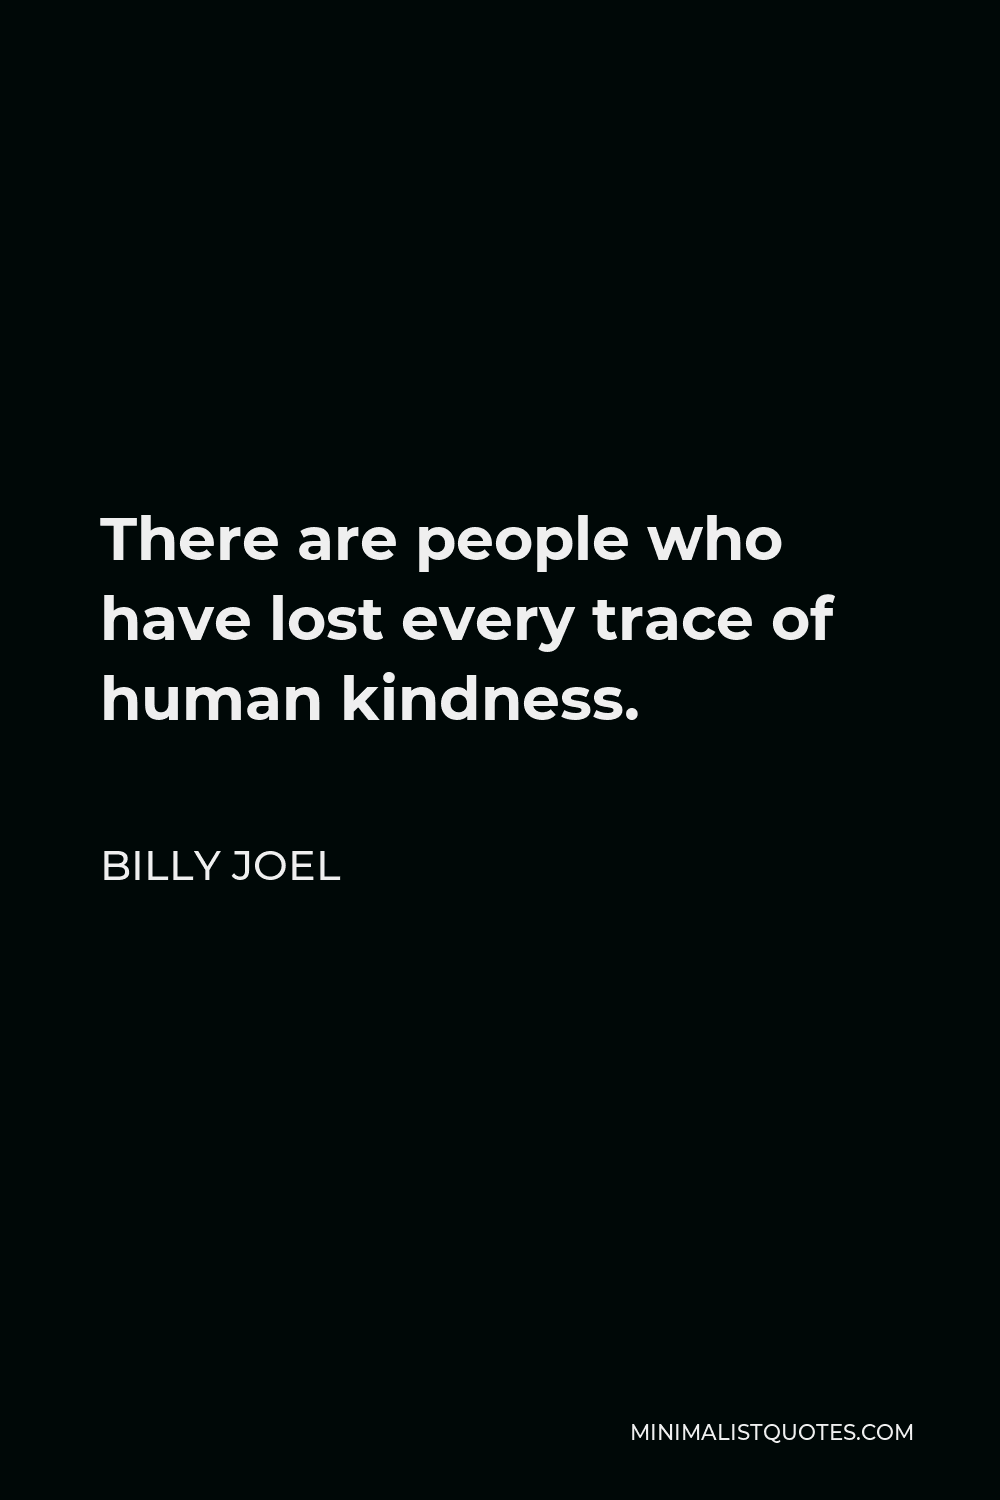 Billy Joel Quote - There are people who have lost every trace of human kindness.